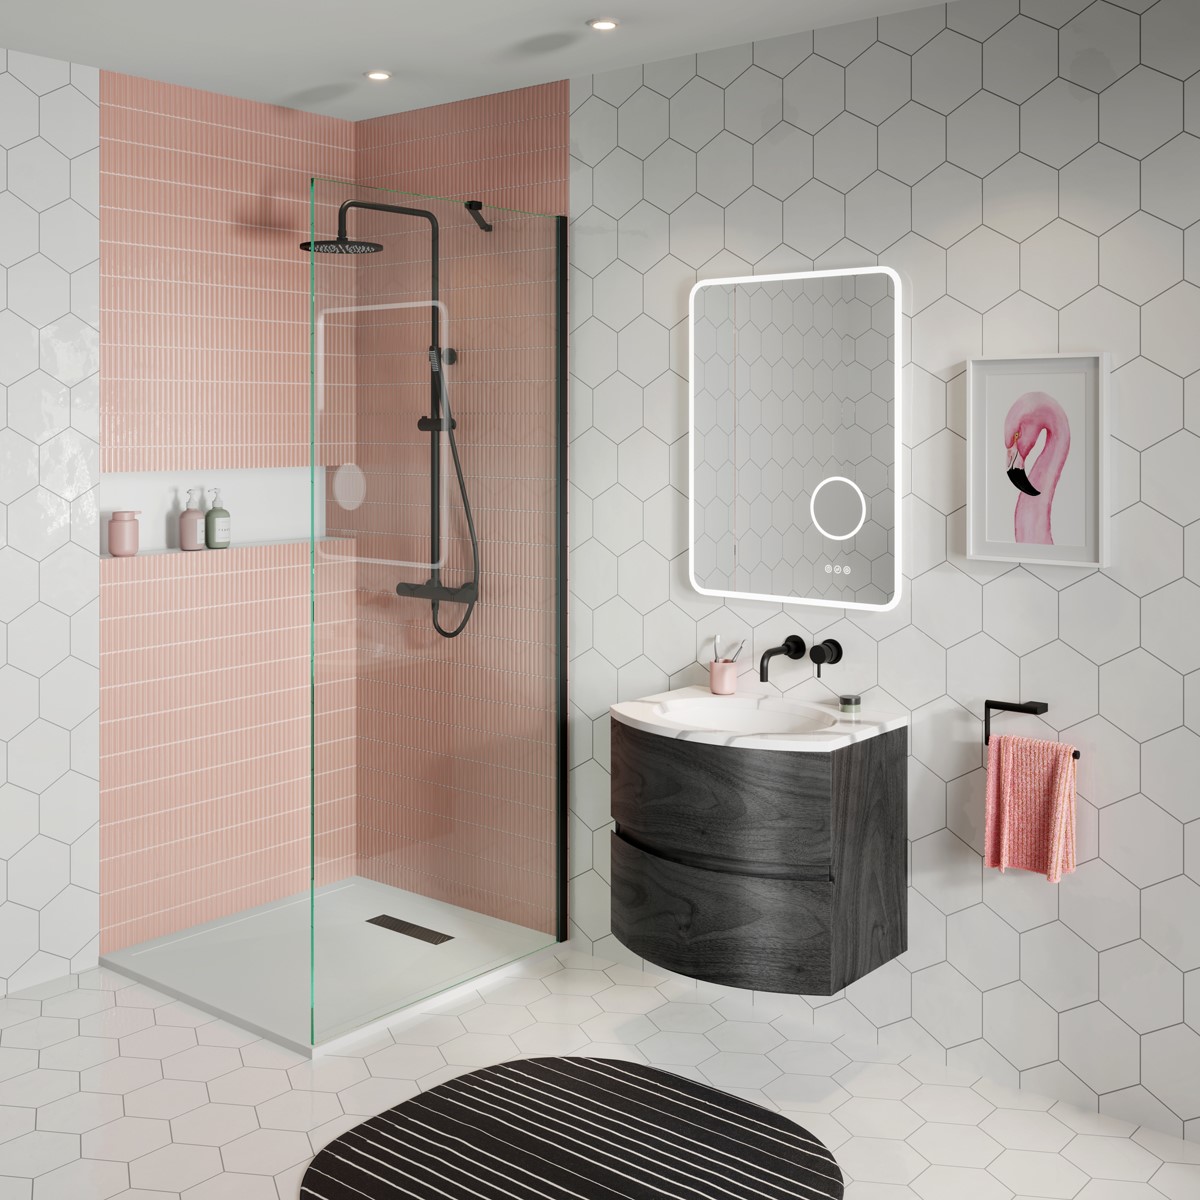 Small bathroom design | Discover small bathroom solutions to suit the whole family with Crosswater